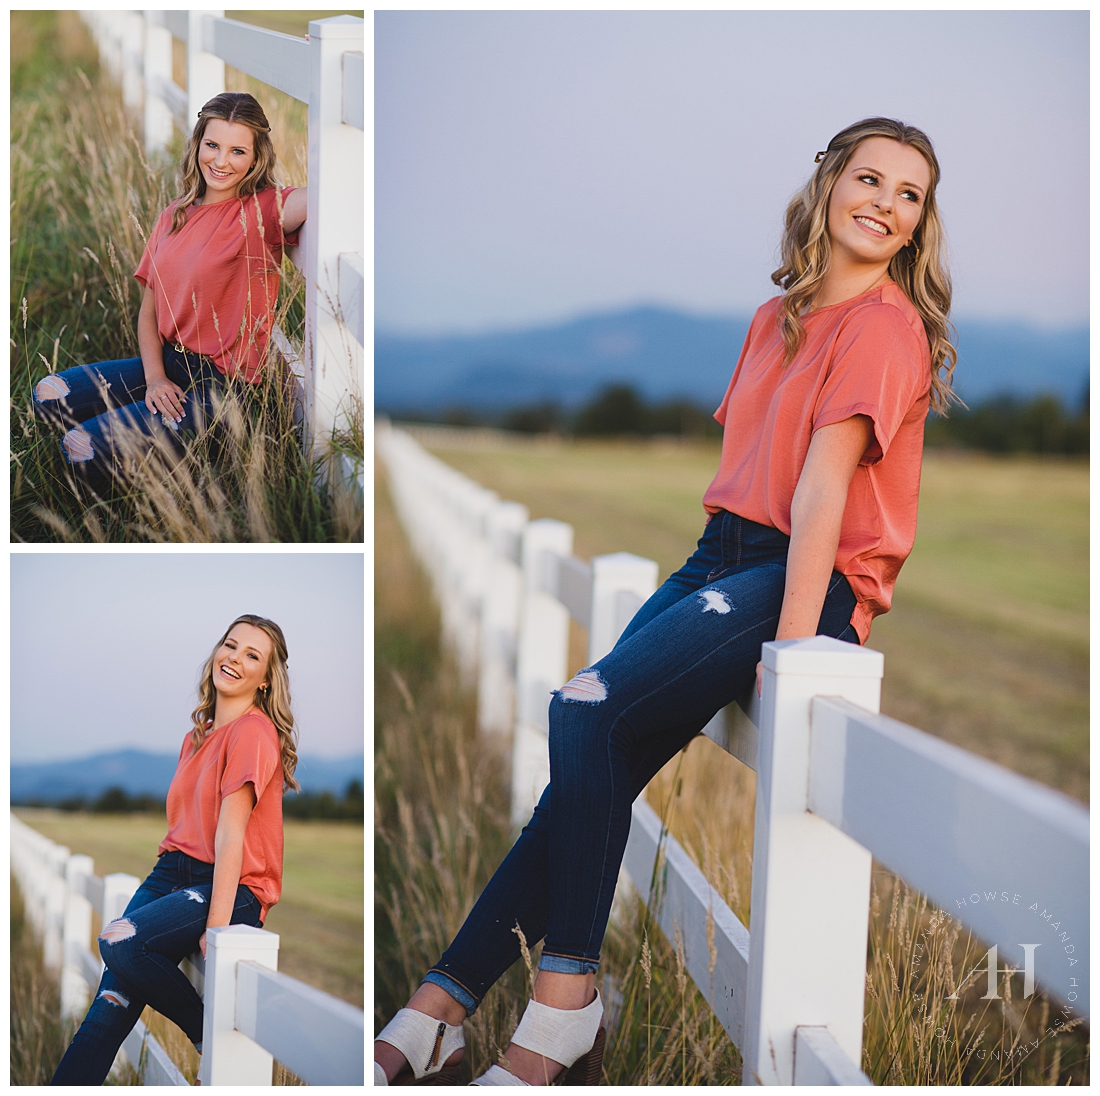 Rustic Senior Portraits in Sumner | White Fence Pose Ideas for Senior Girls, Rustic Portraits, County Settings for Senior Portraits near Tacoma, Outfit Inspo | Photographed by Tacoma's Best Senior Photographer Amanda Howse